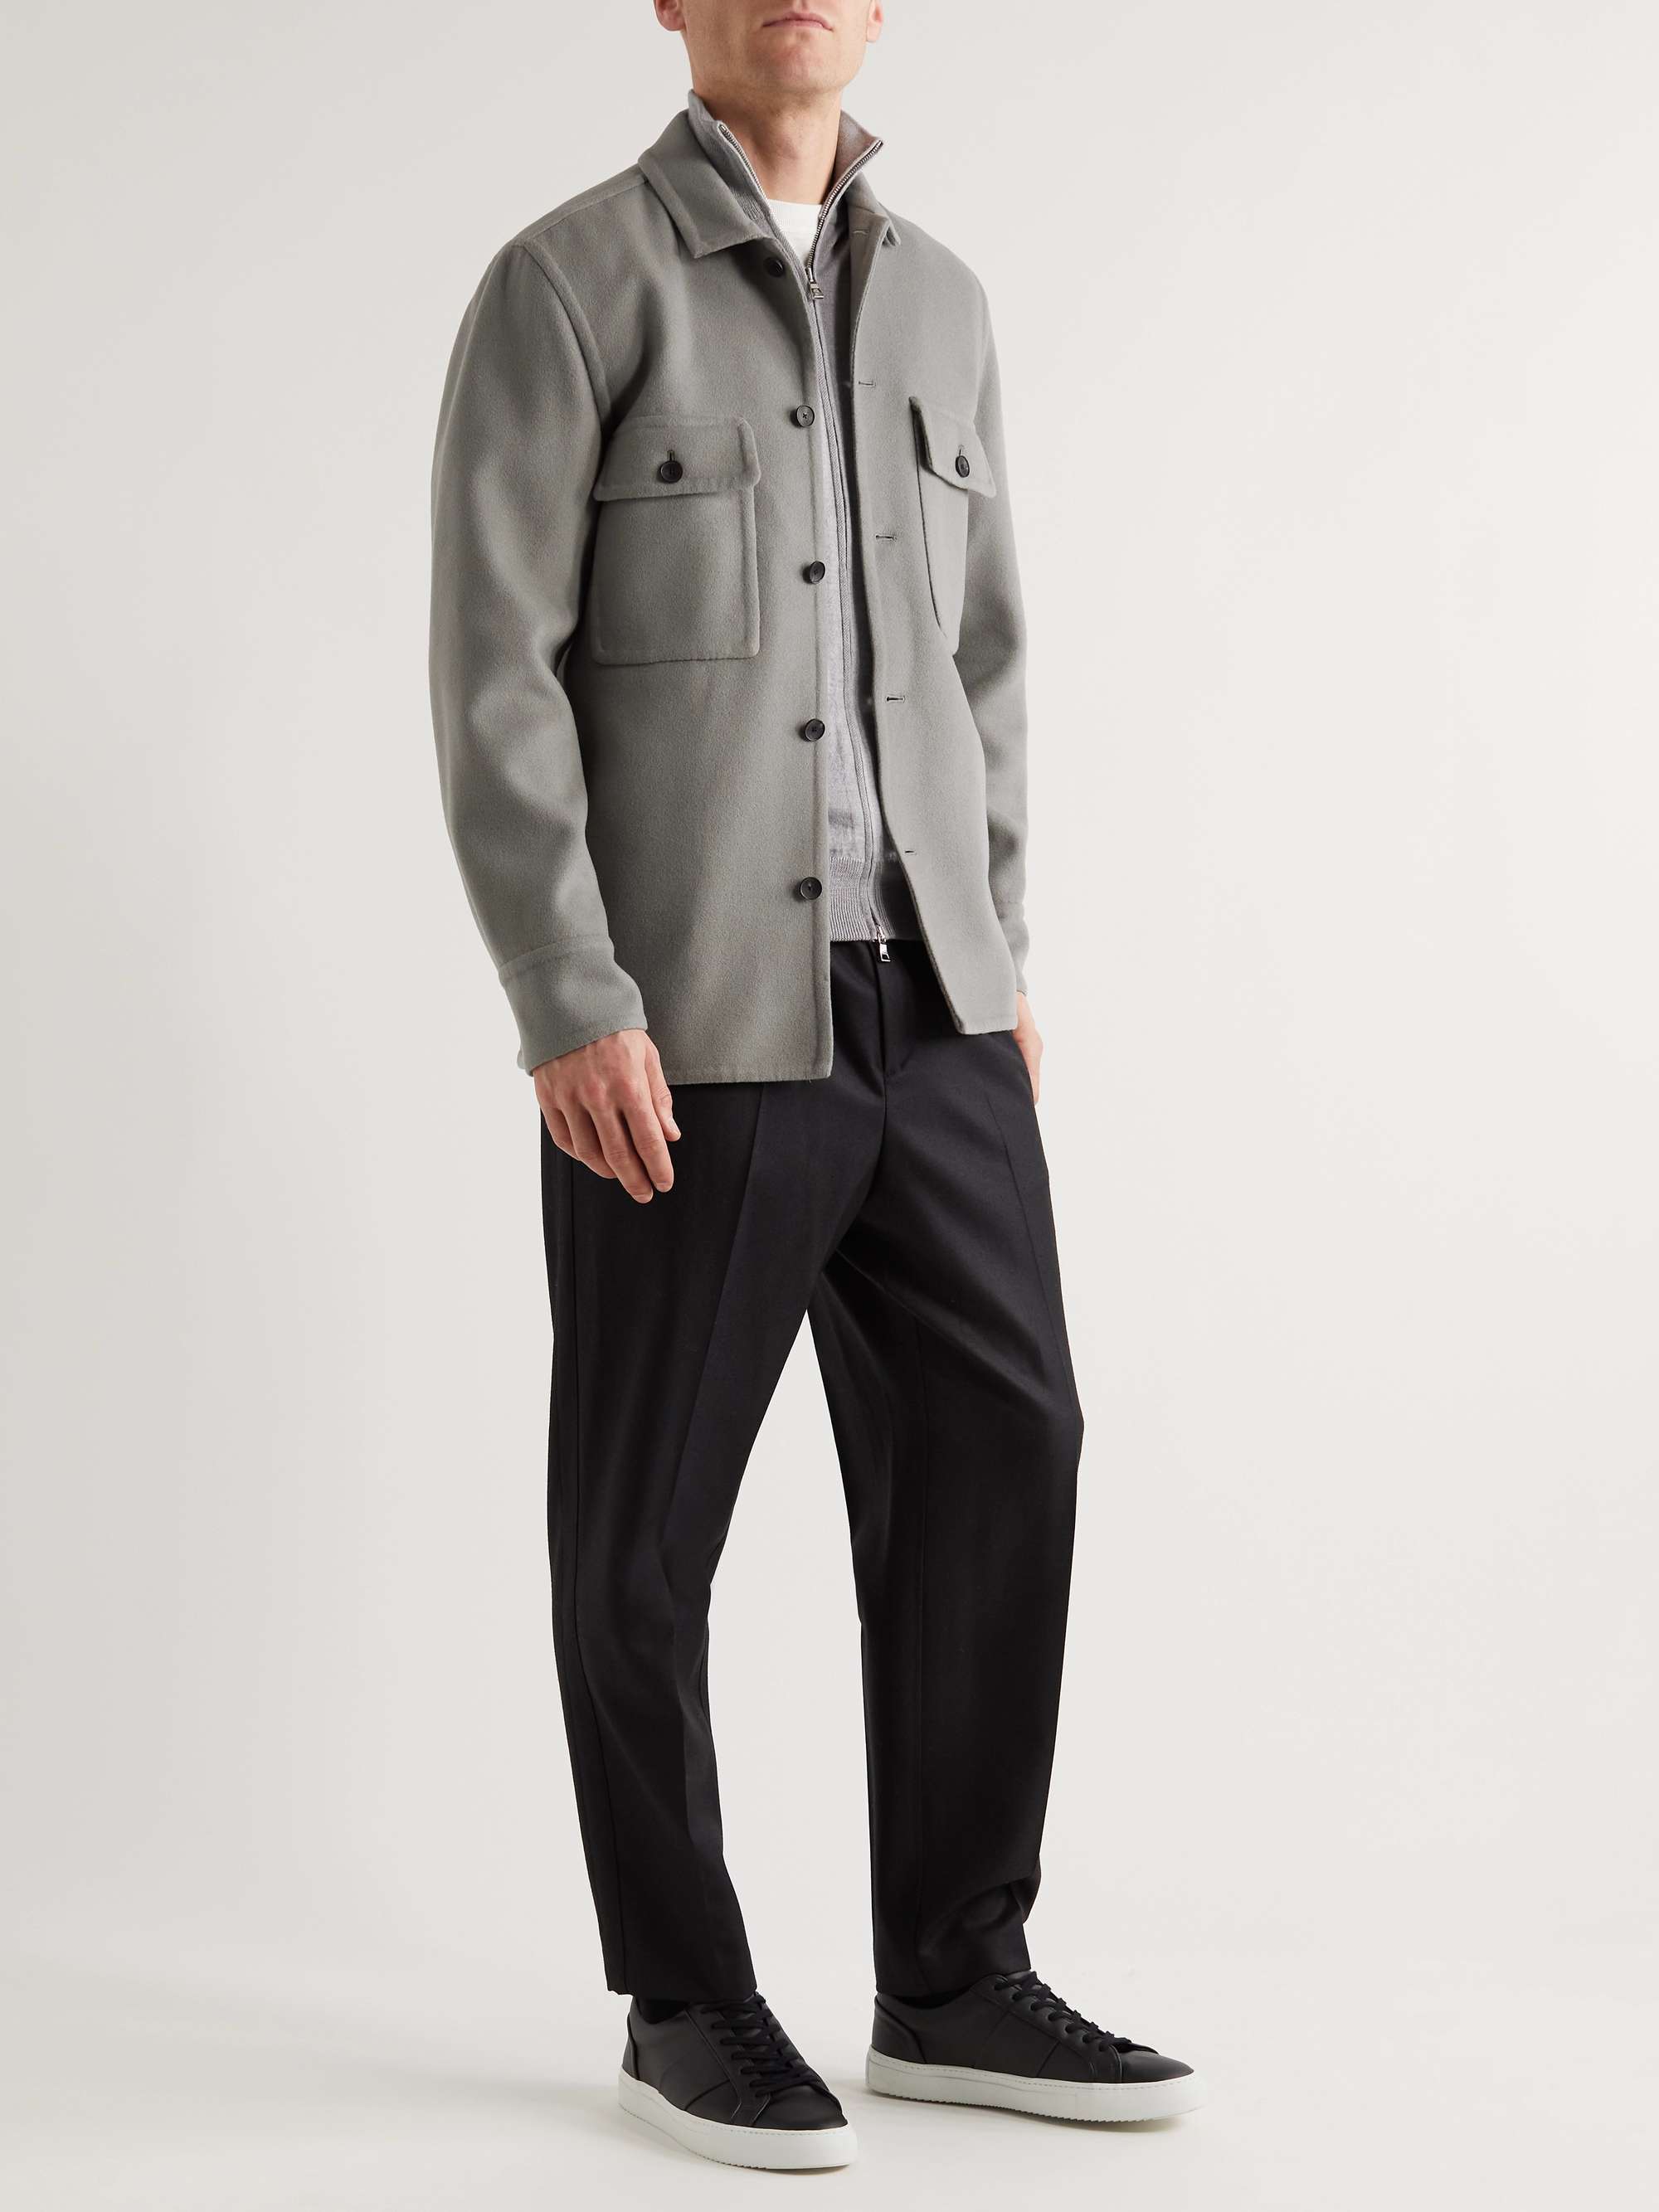 MR P. Double-Faced Splitable Cashmere and Virgin Wool-Blend Overshirt